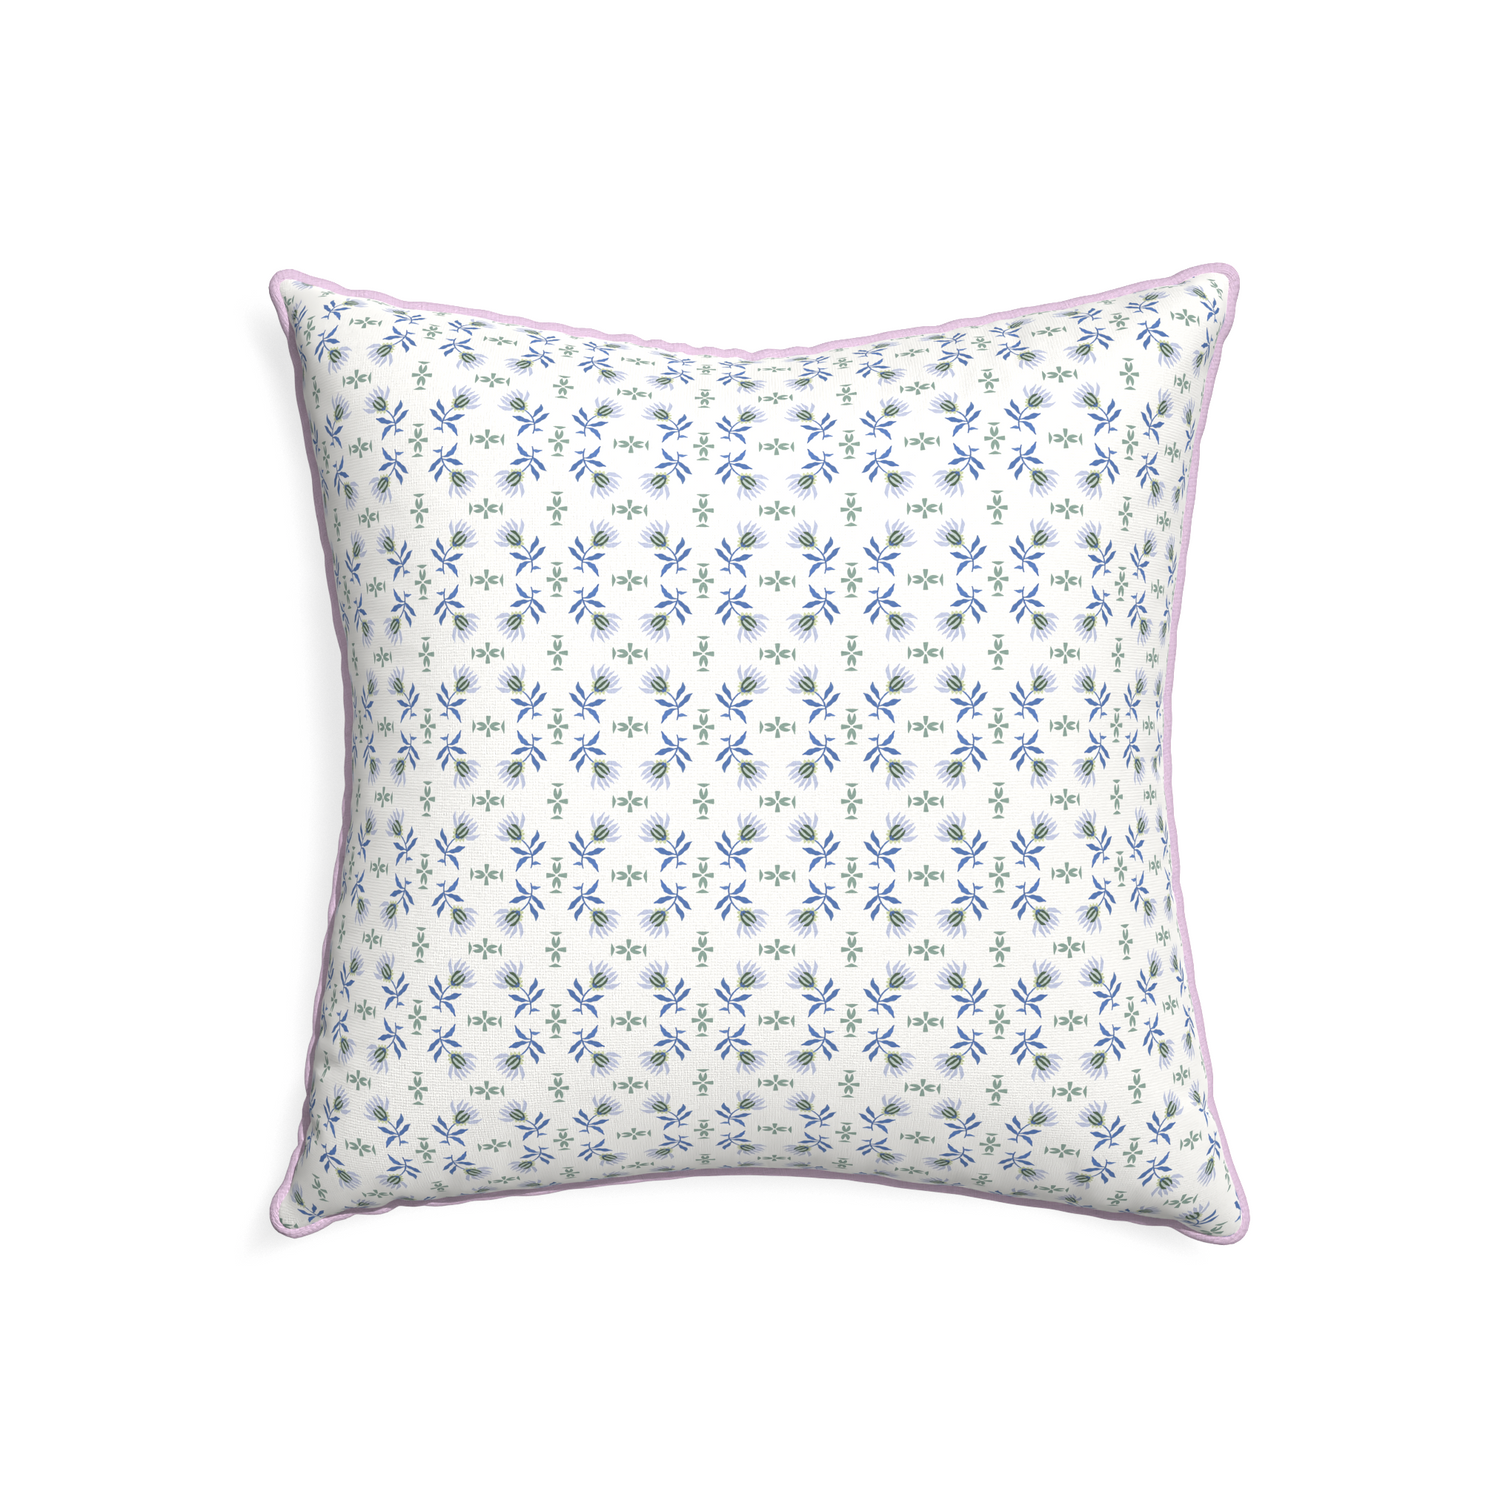 22-square lee custom pillow with l piping on white background